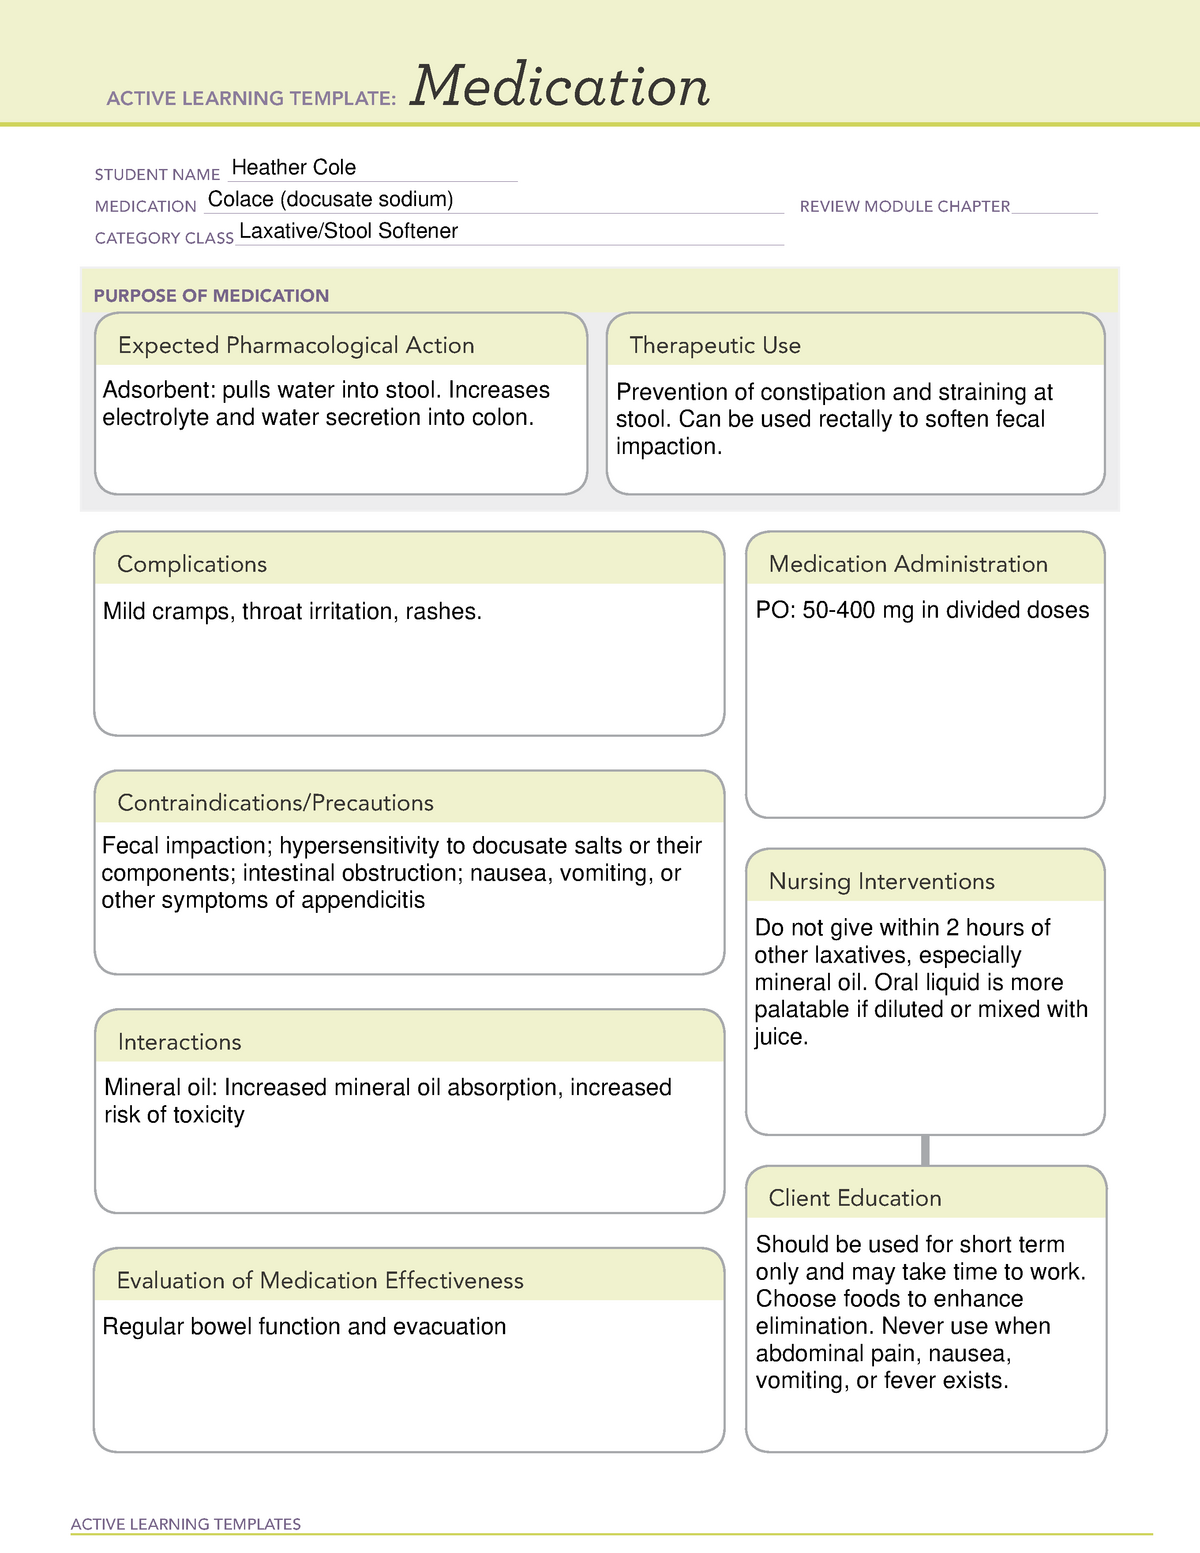 colace-drug-cards-active-learning-templates-medication-student-name